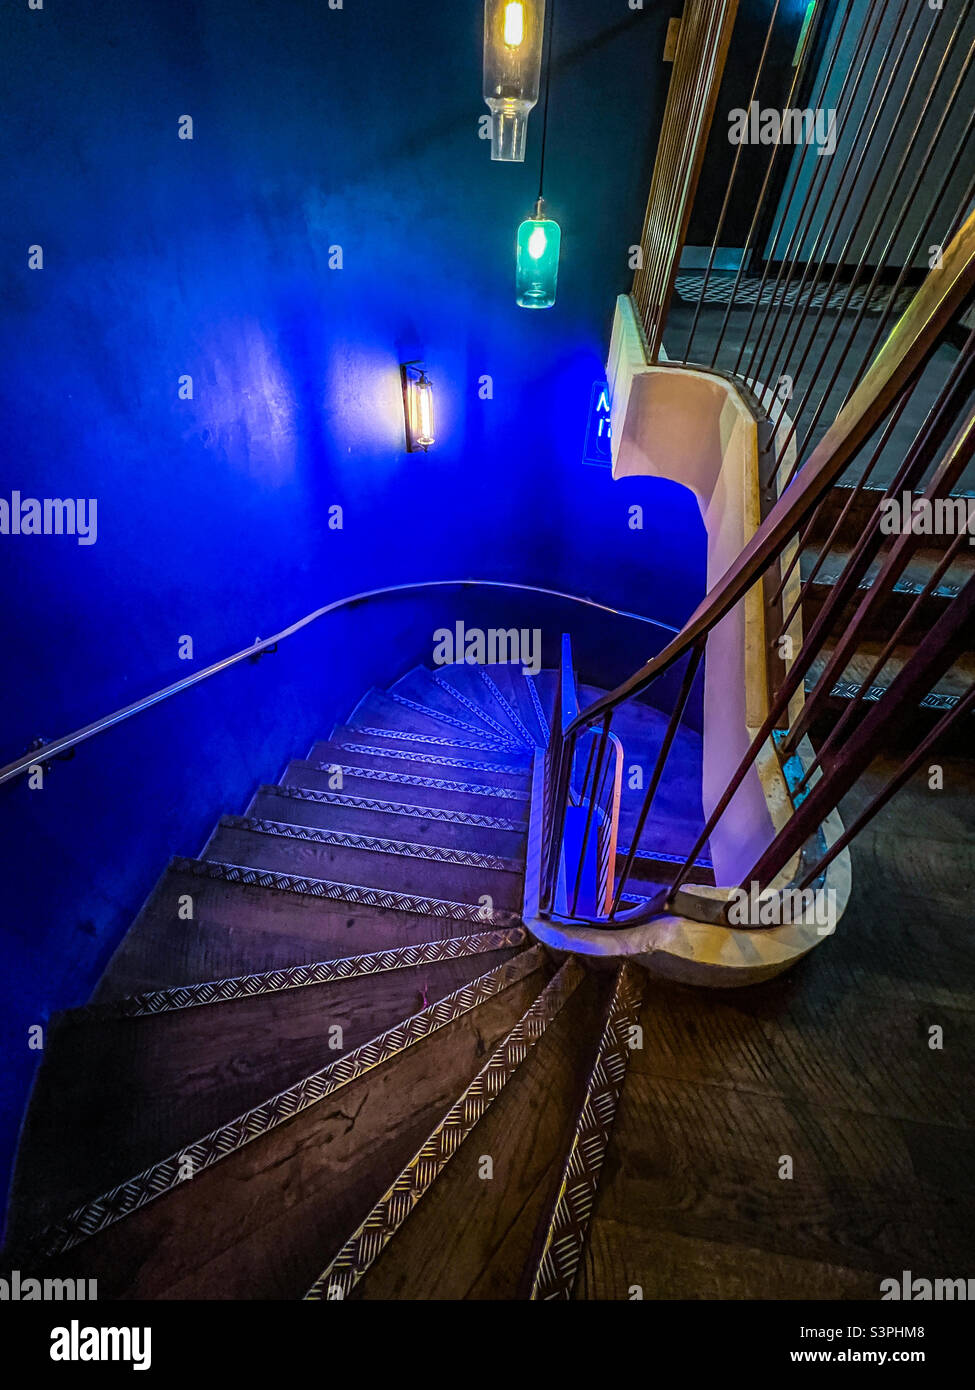 Old wooden staircase with blue led lights Stock Photo